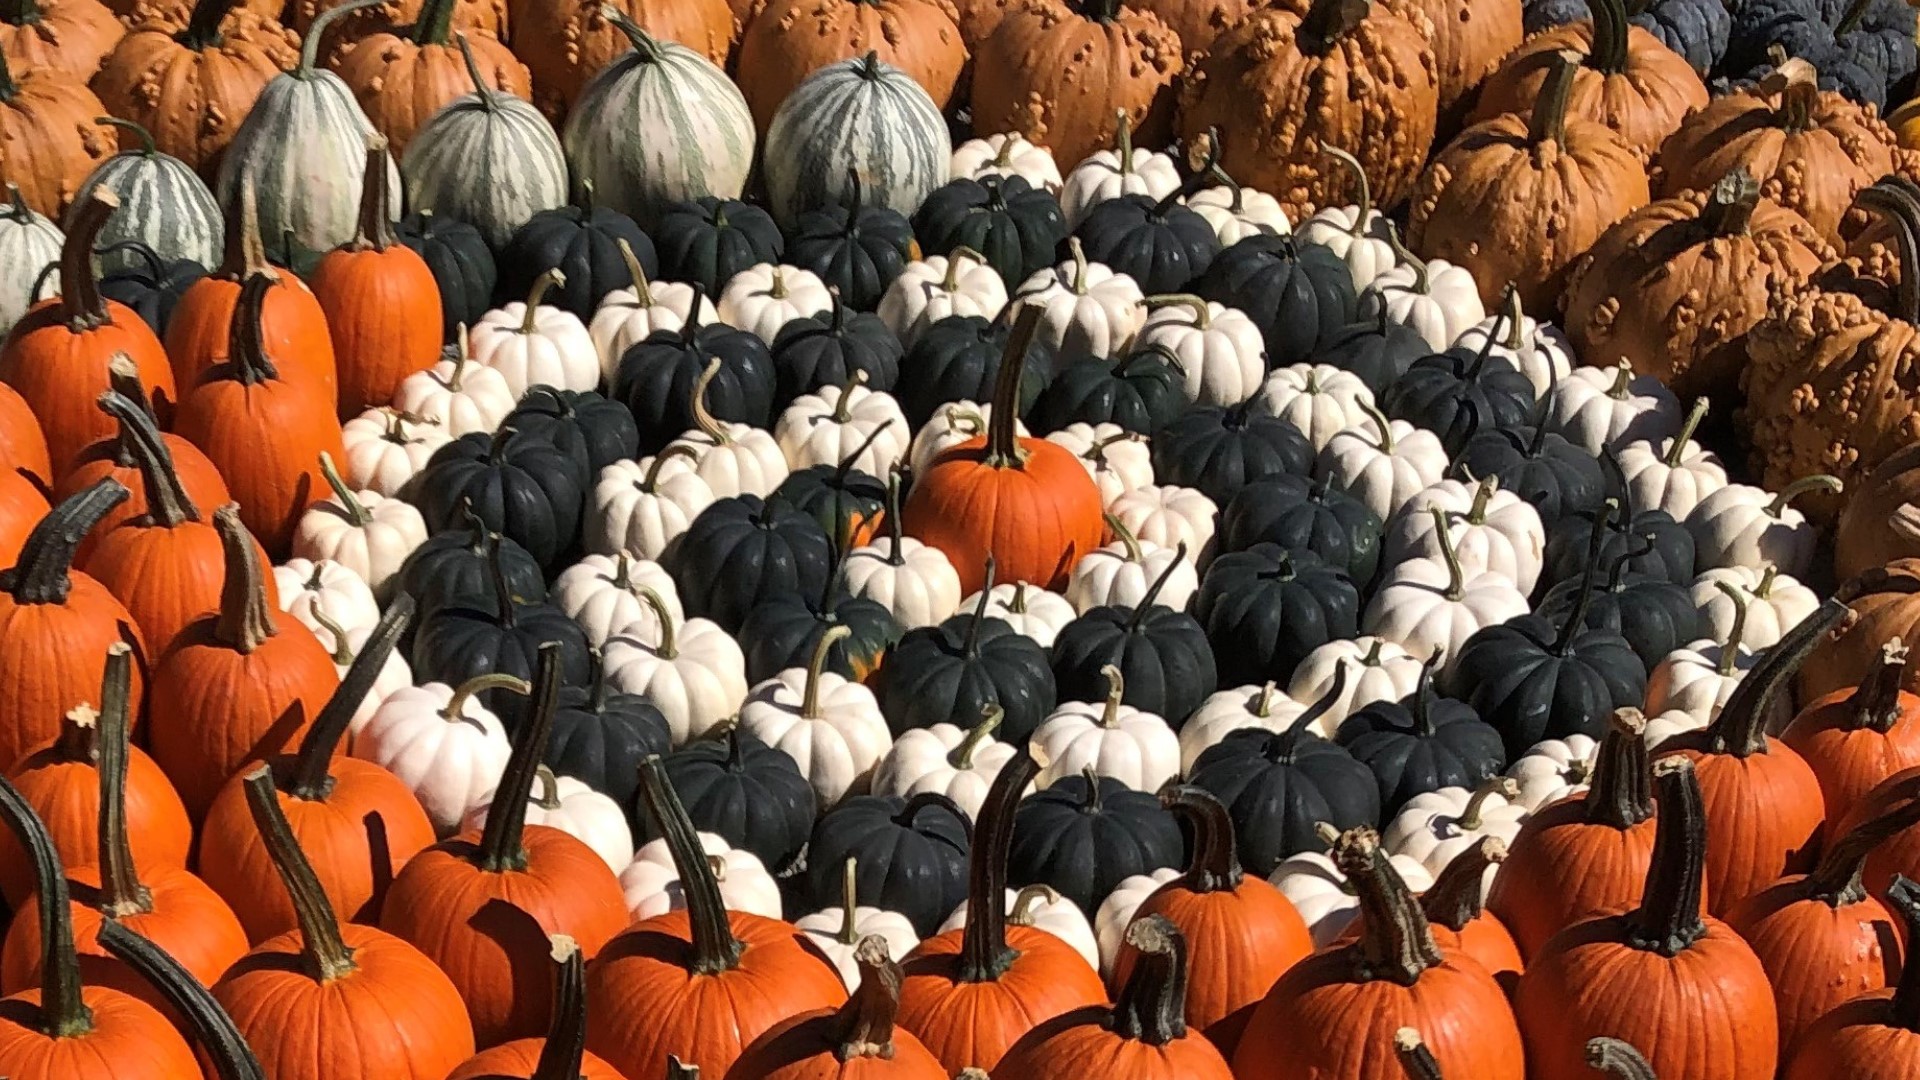 Autumn has arrived, and with it, the reinvention of a fall attraction in Wyoming County.